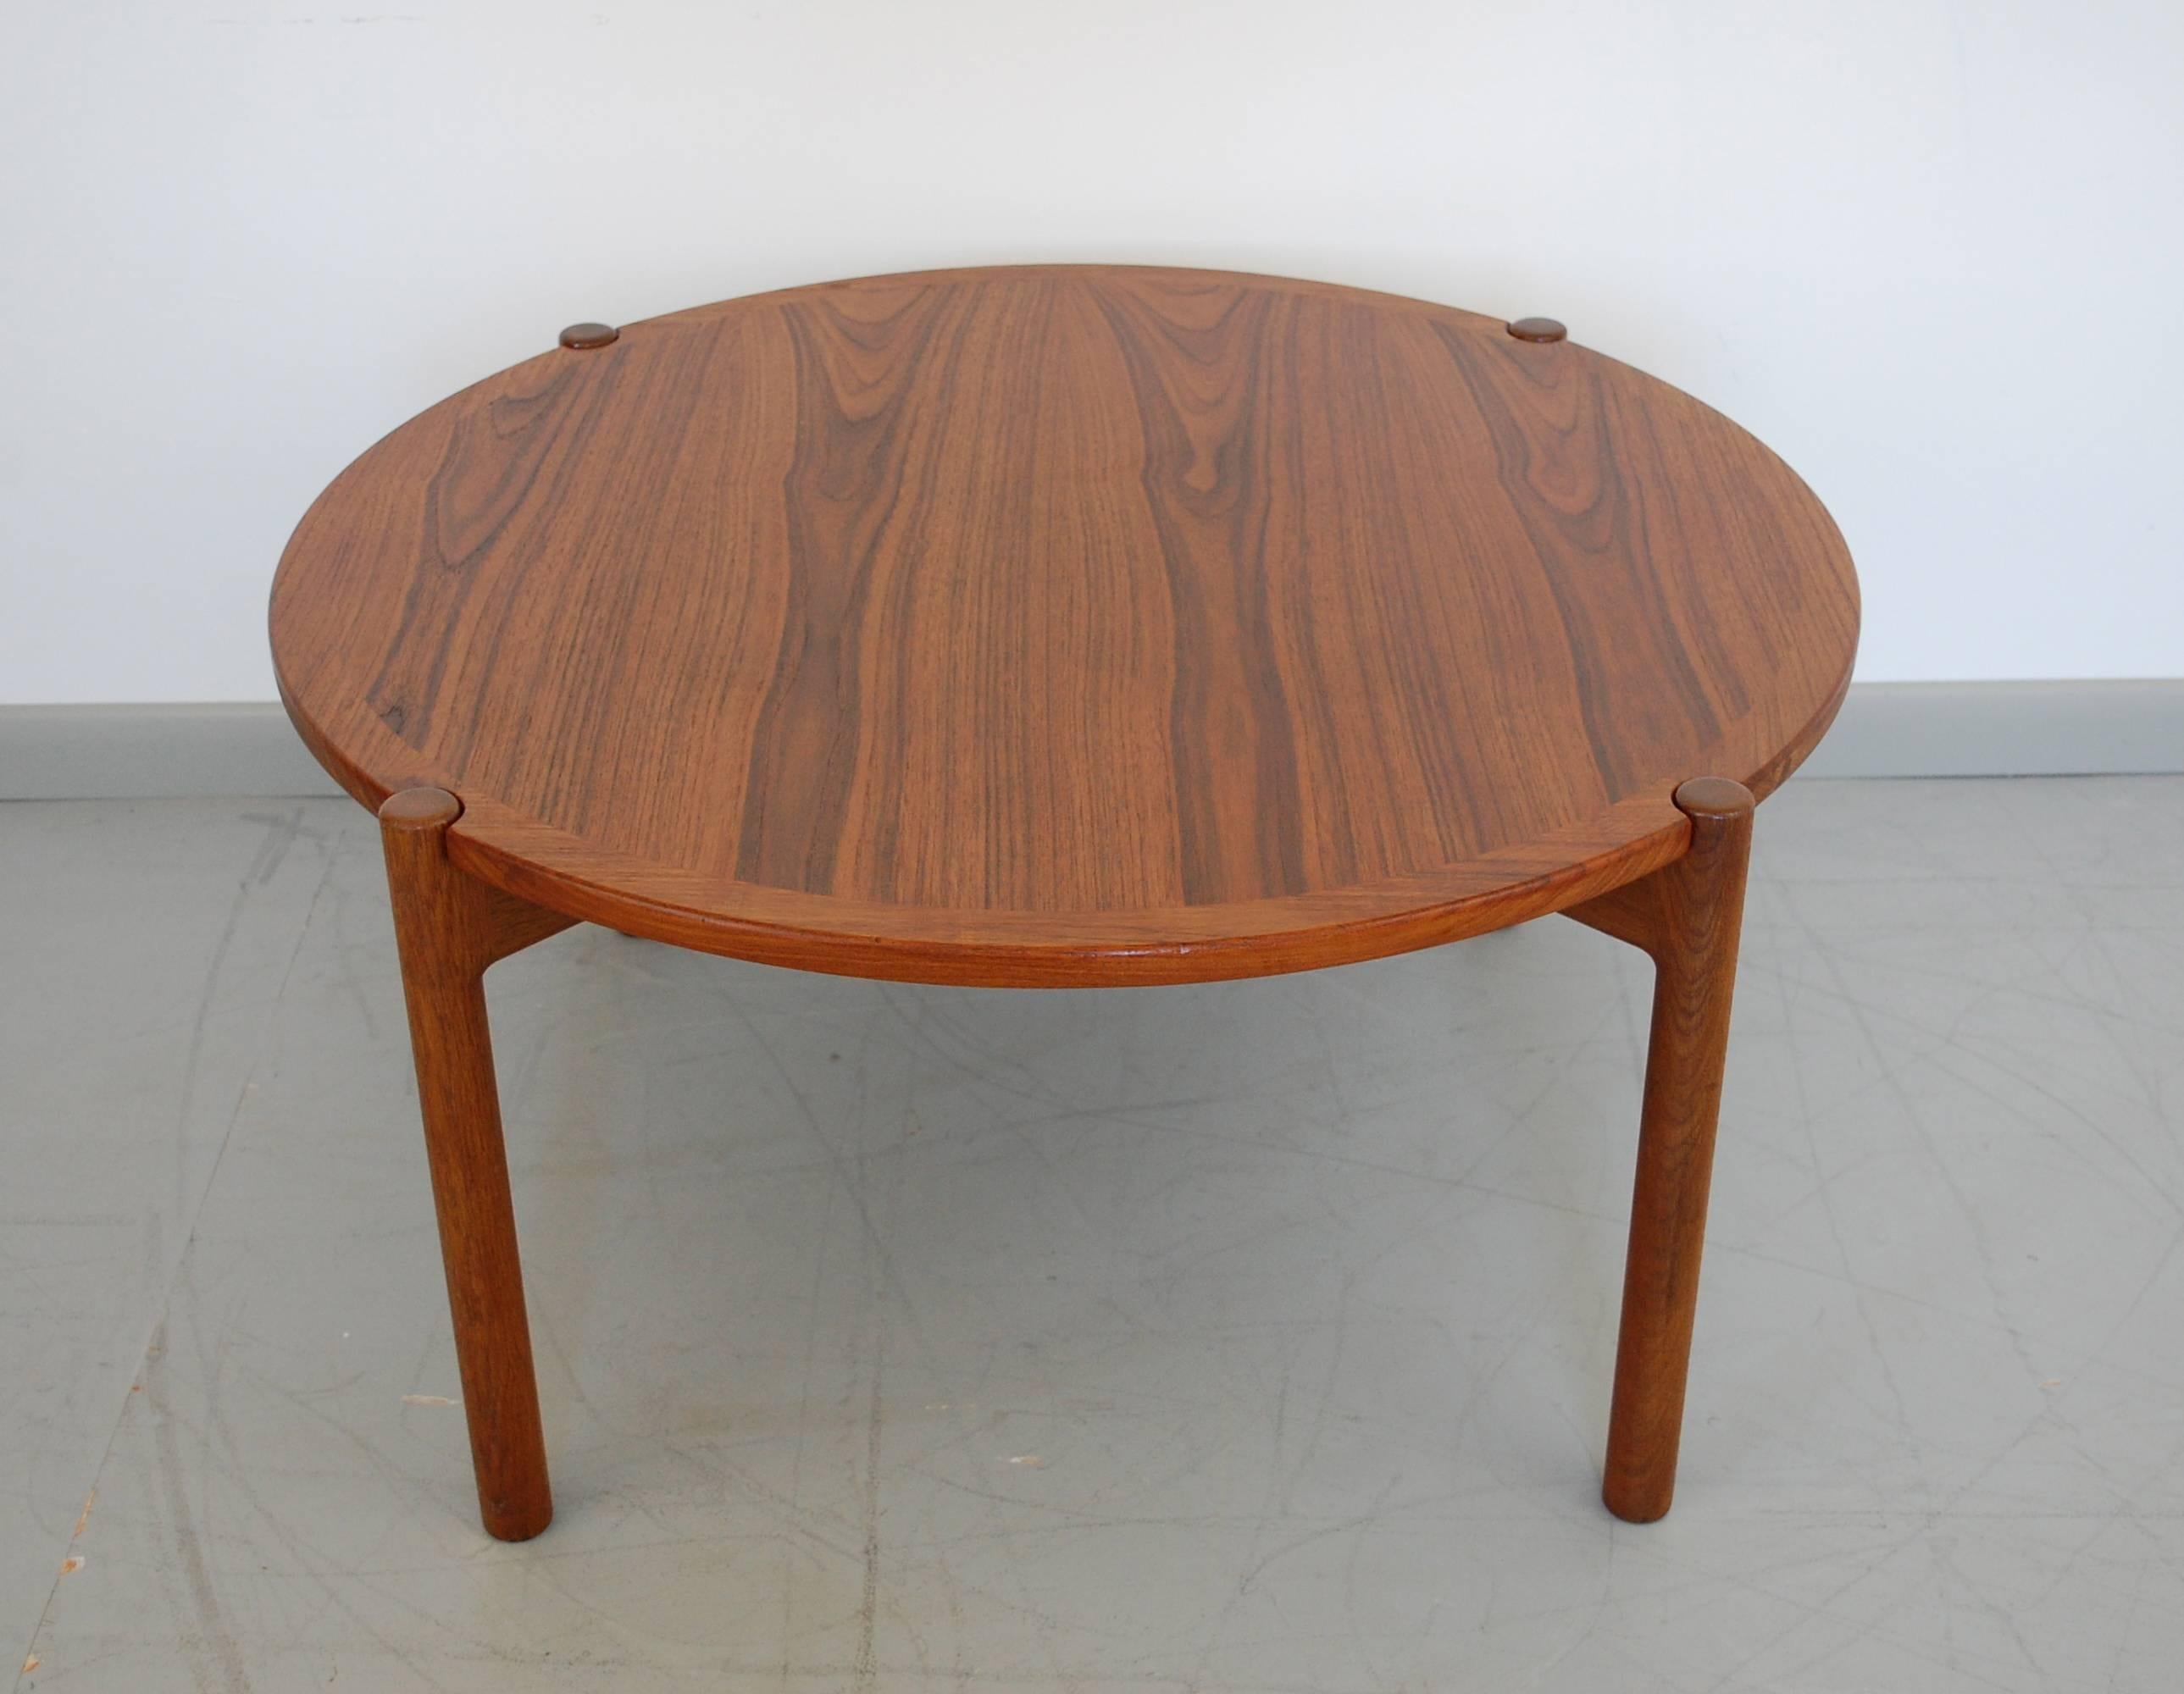 Early reversible top coffee table by Hans Wegner for Johannes Hansen. Flip-top with solid teak side and black laminate inlay side, resting on solid oak base. Teak and oak both newly restored. Stamped Johannes Hansen.